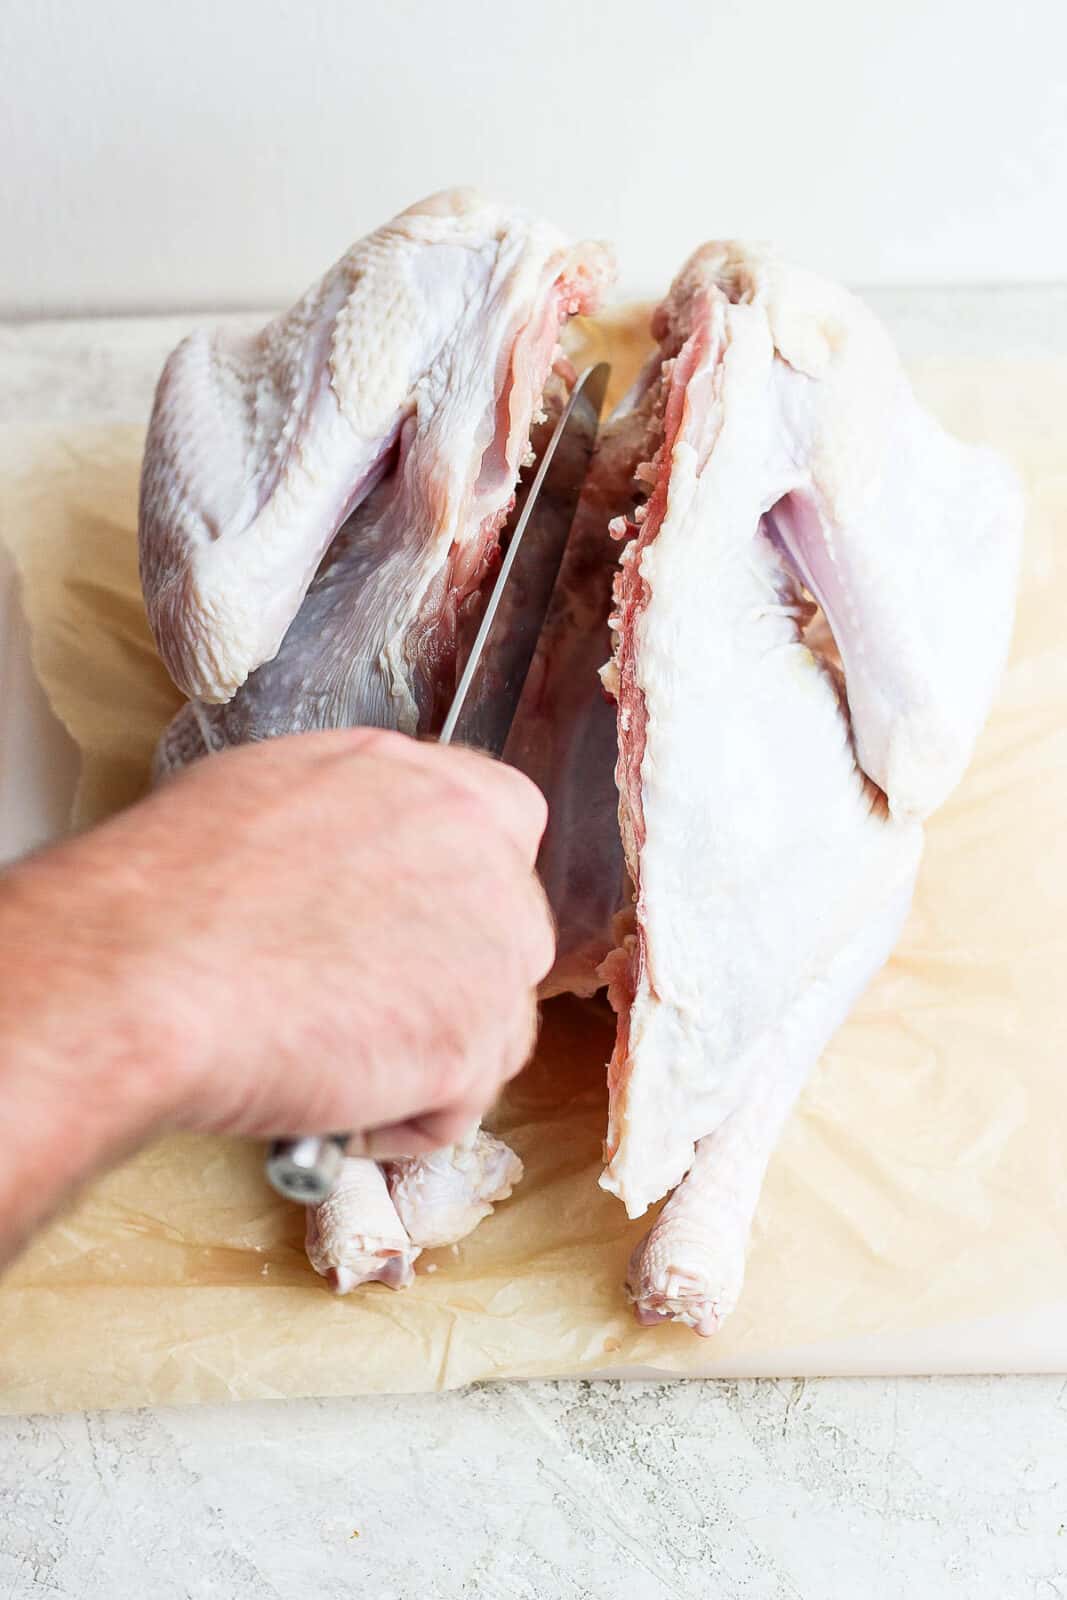 Someone using a knife to make a slit at the top of the breastbone so the chicken can be flipped and lay flat.